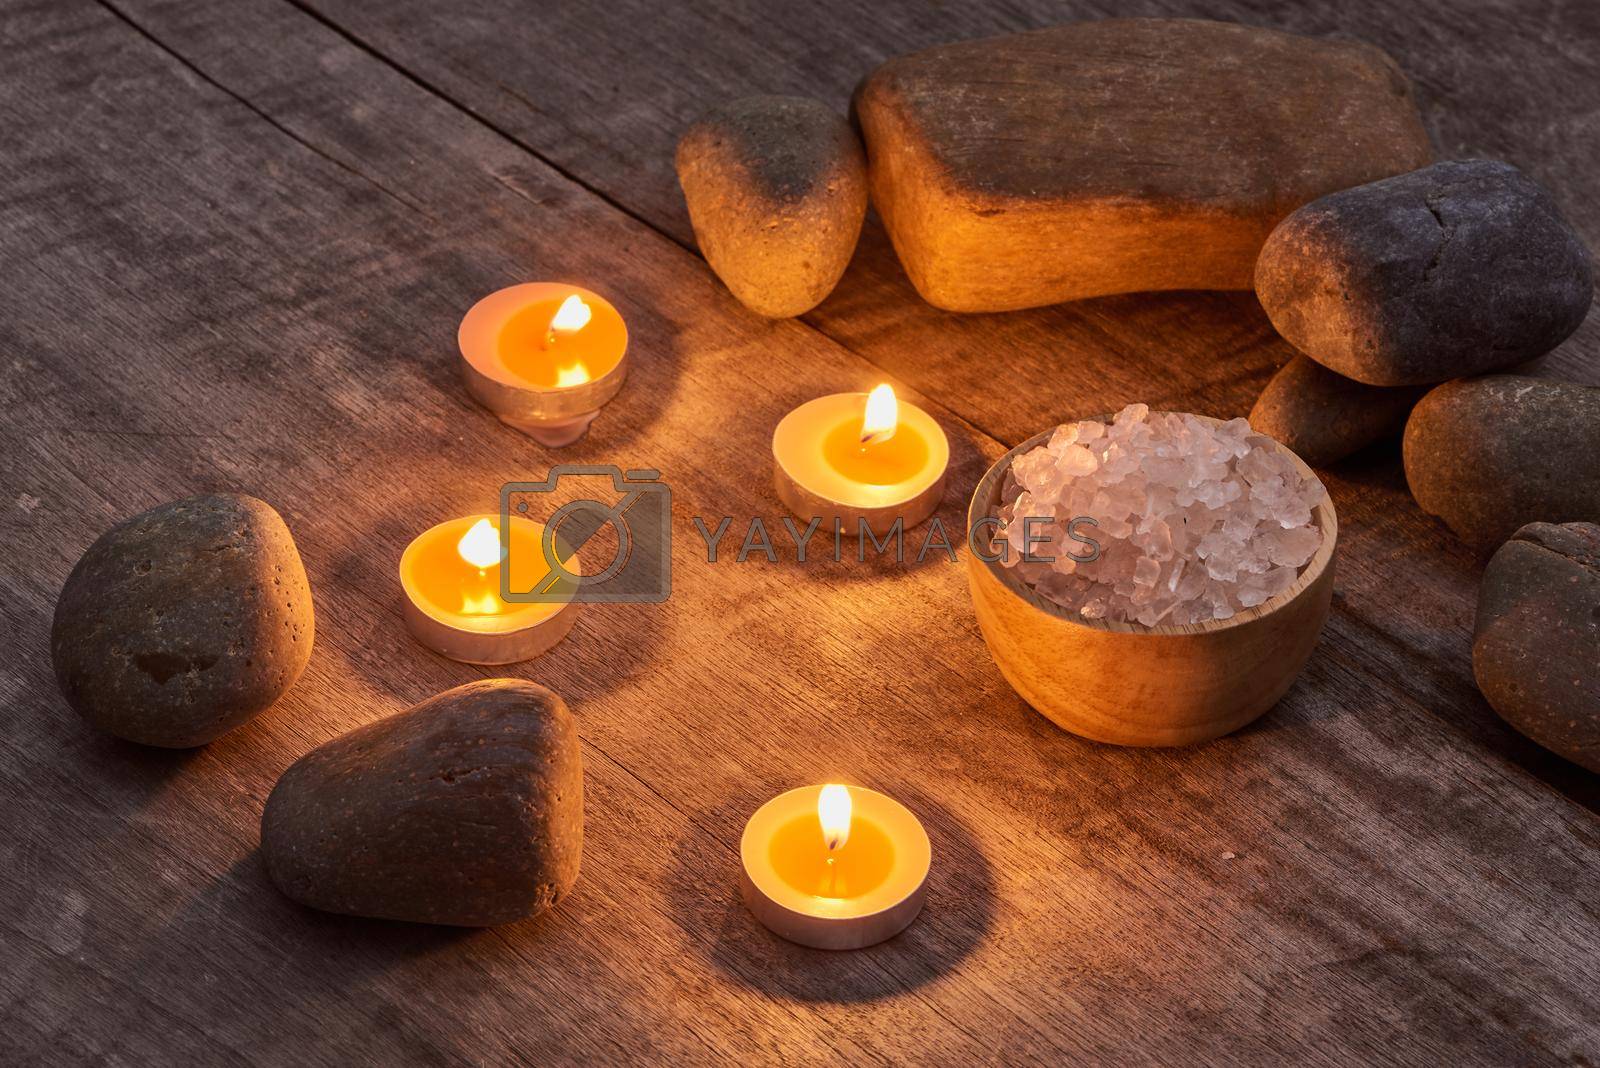 Aromatherapy SPA set/ Spa setting over wooden background